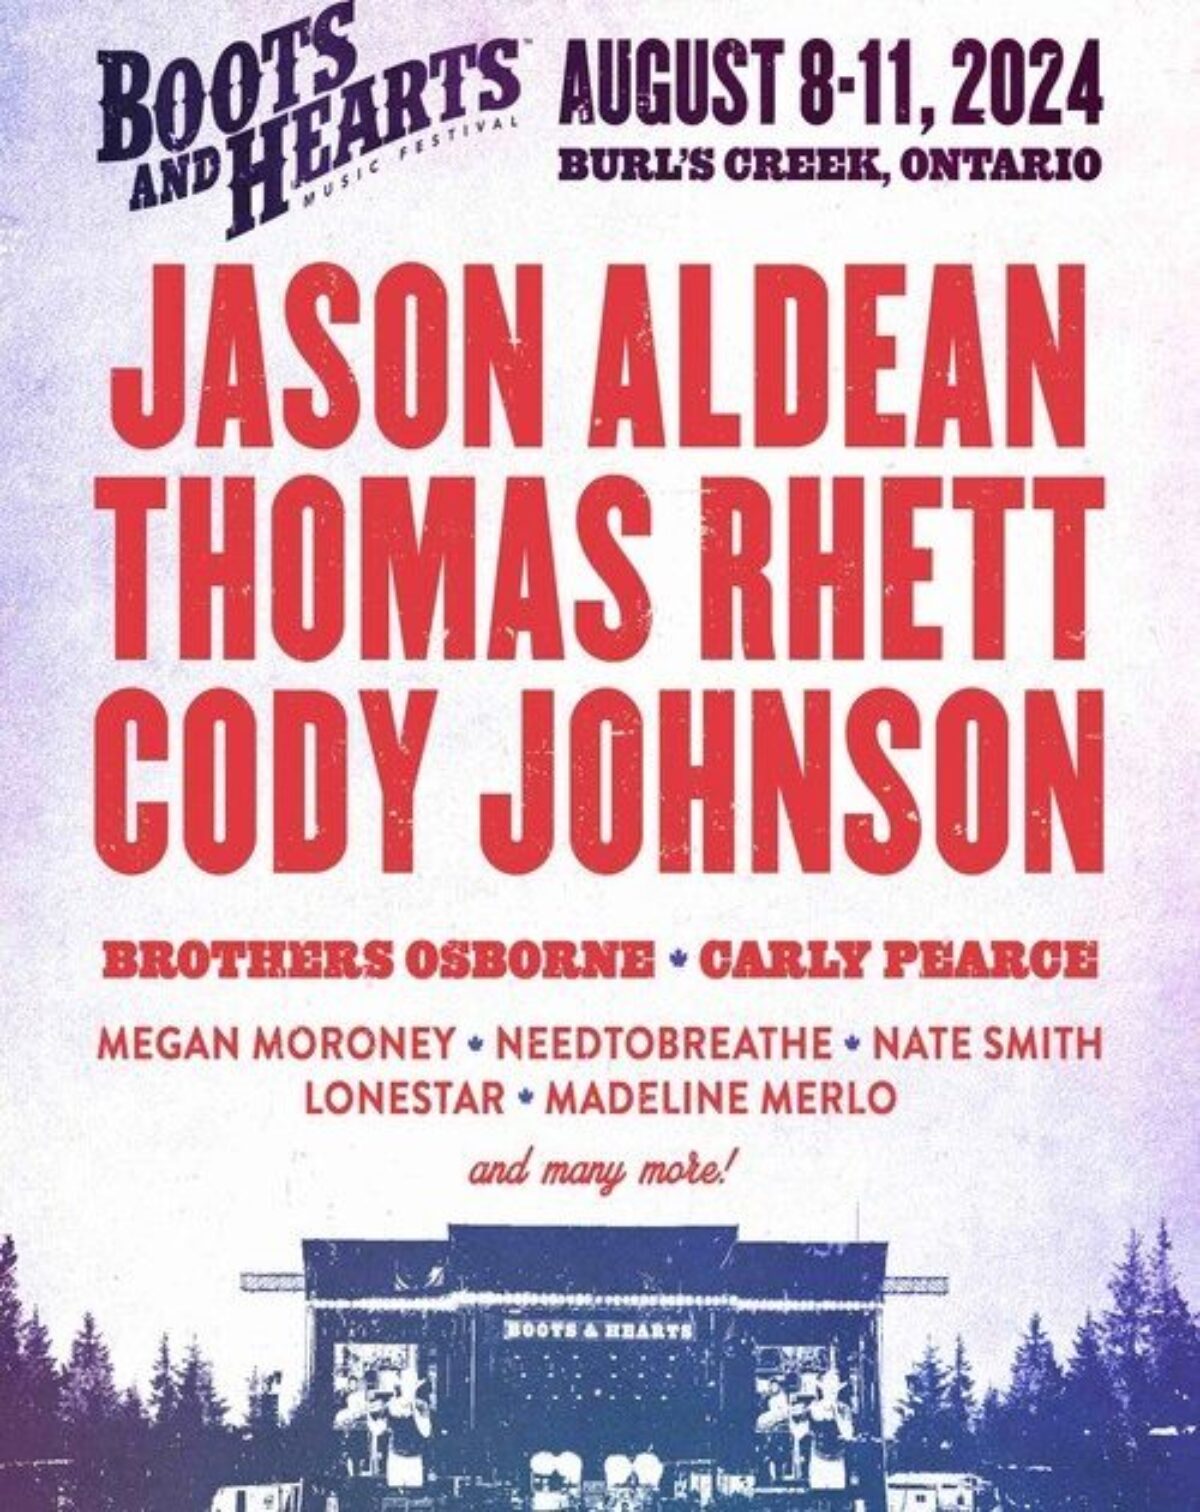 Boots and Hearts 2024 festival flyer